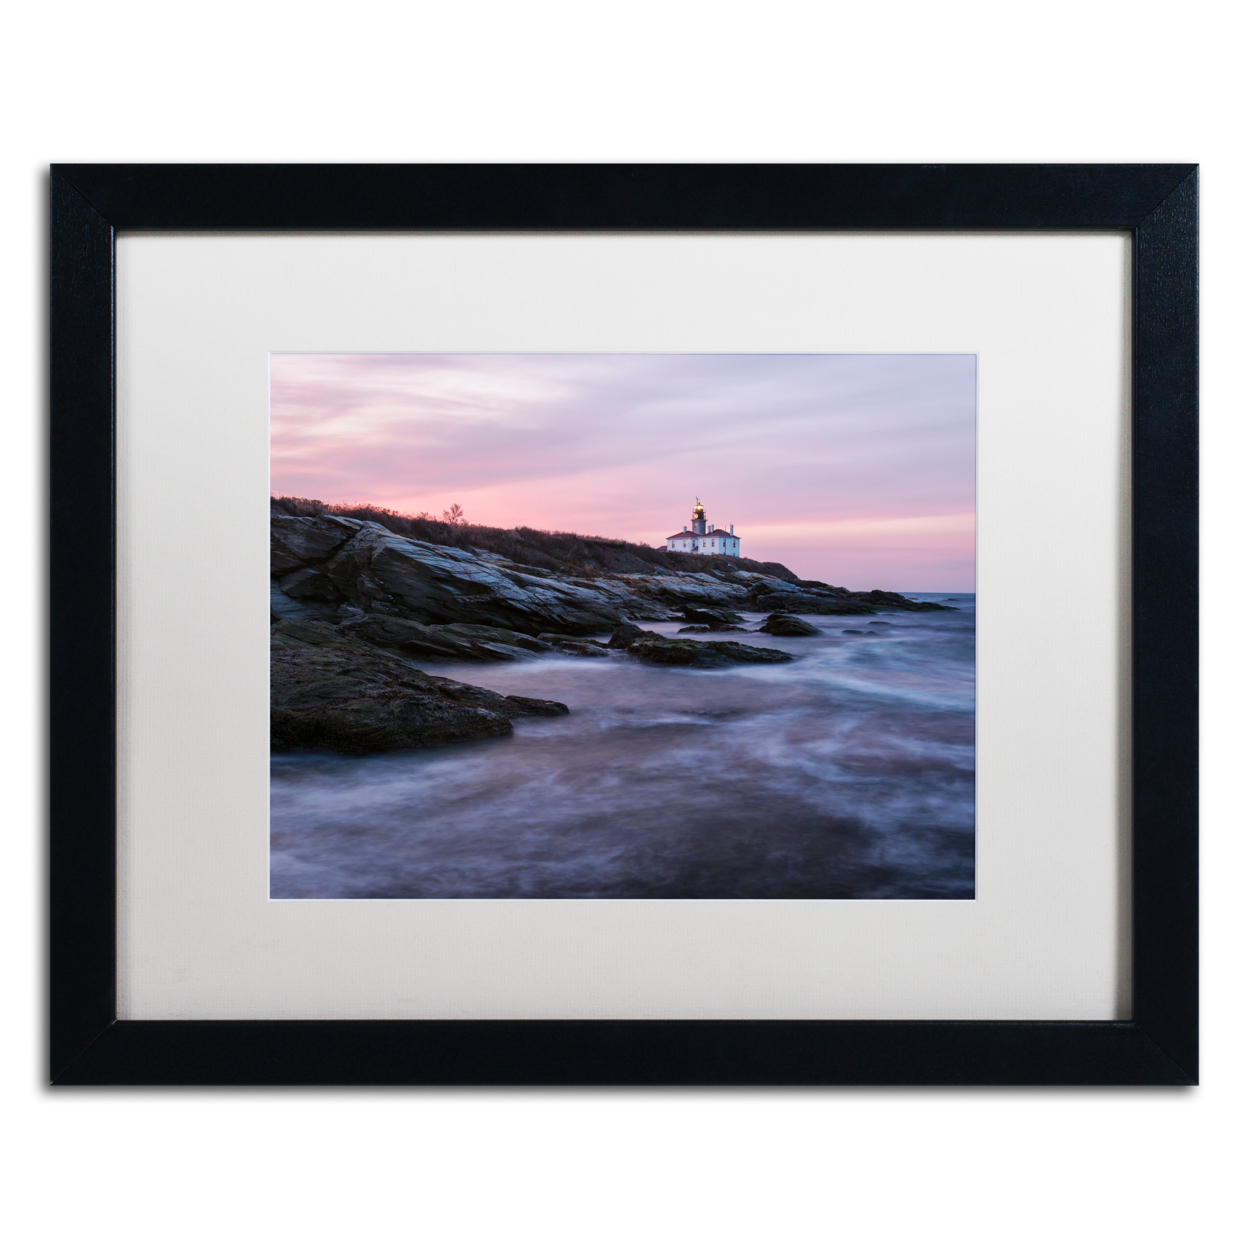 Michael Blanchette Photography 'Dawn At Beavertail' Black Wooden Framed Art 18 X 22 Inches